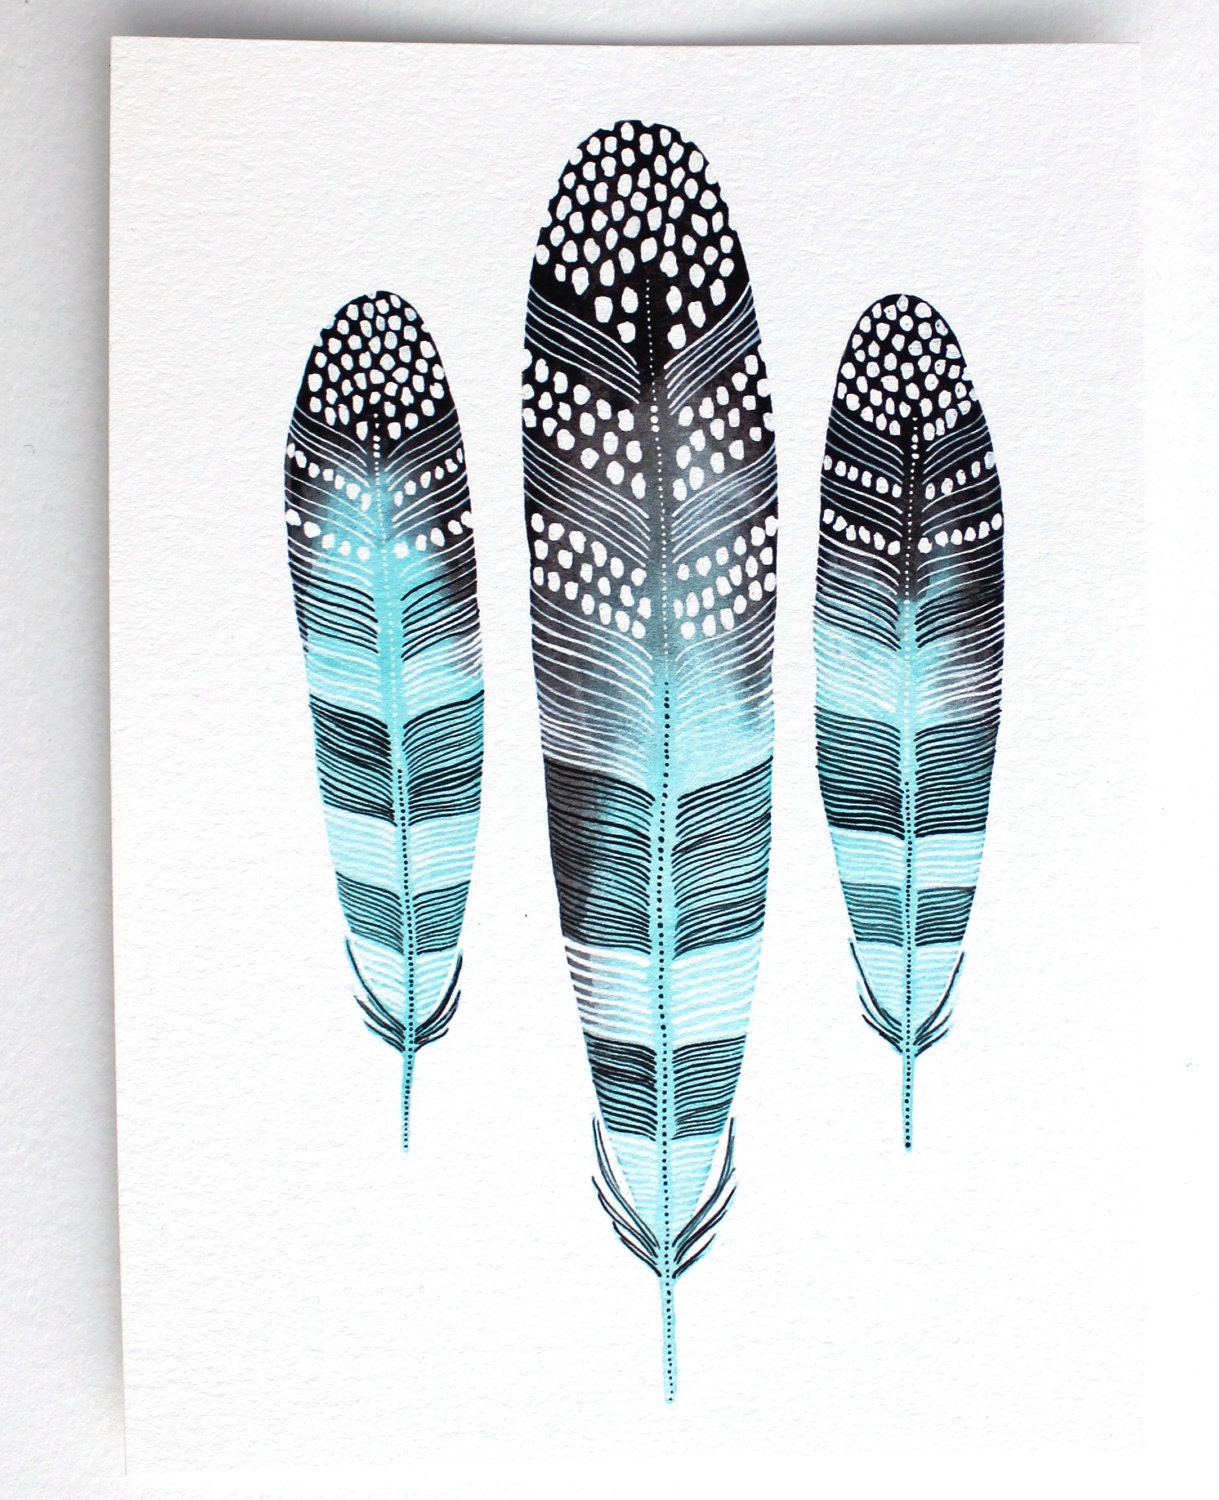 Feather Painting - Watercolor Art - Archival Print - 8x10 Taos Feathers - RiverLuna